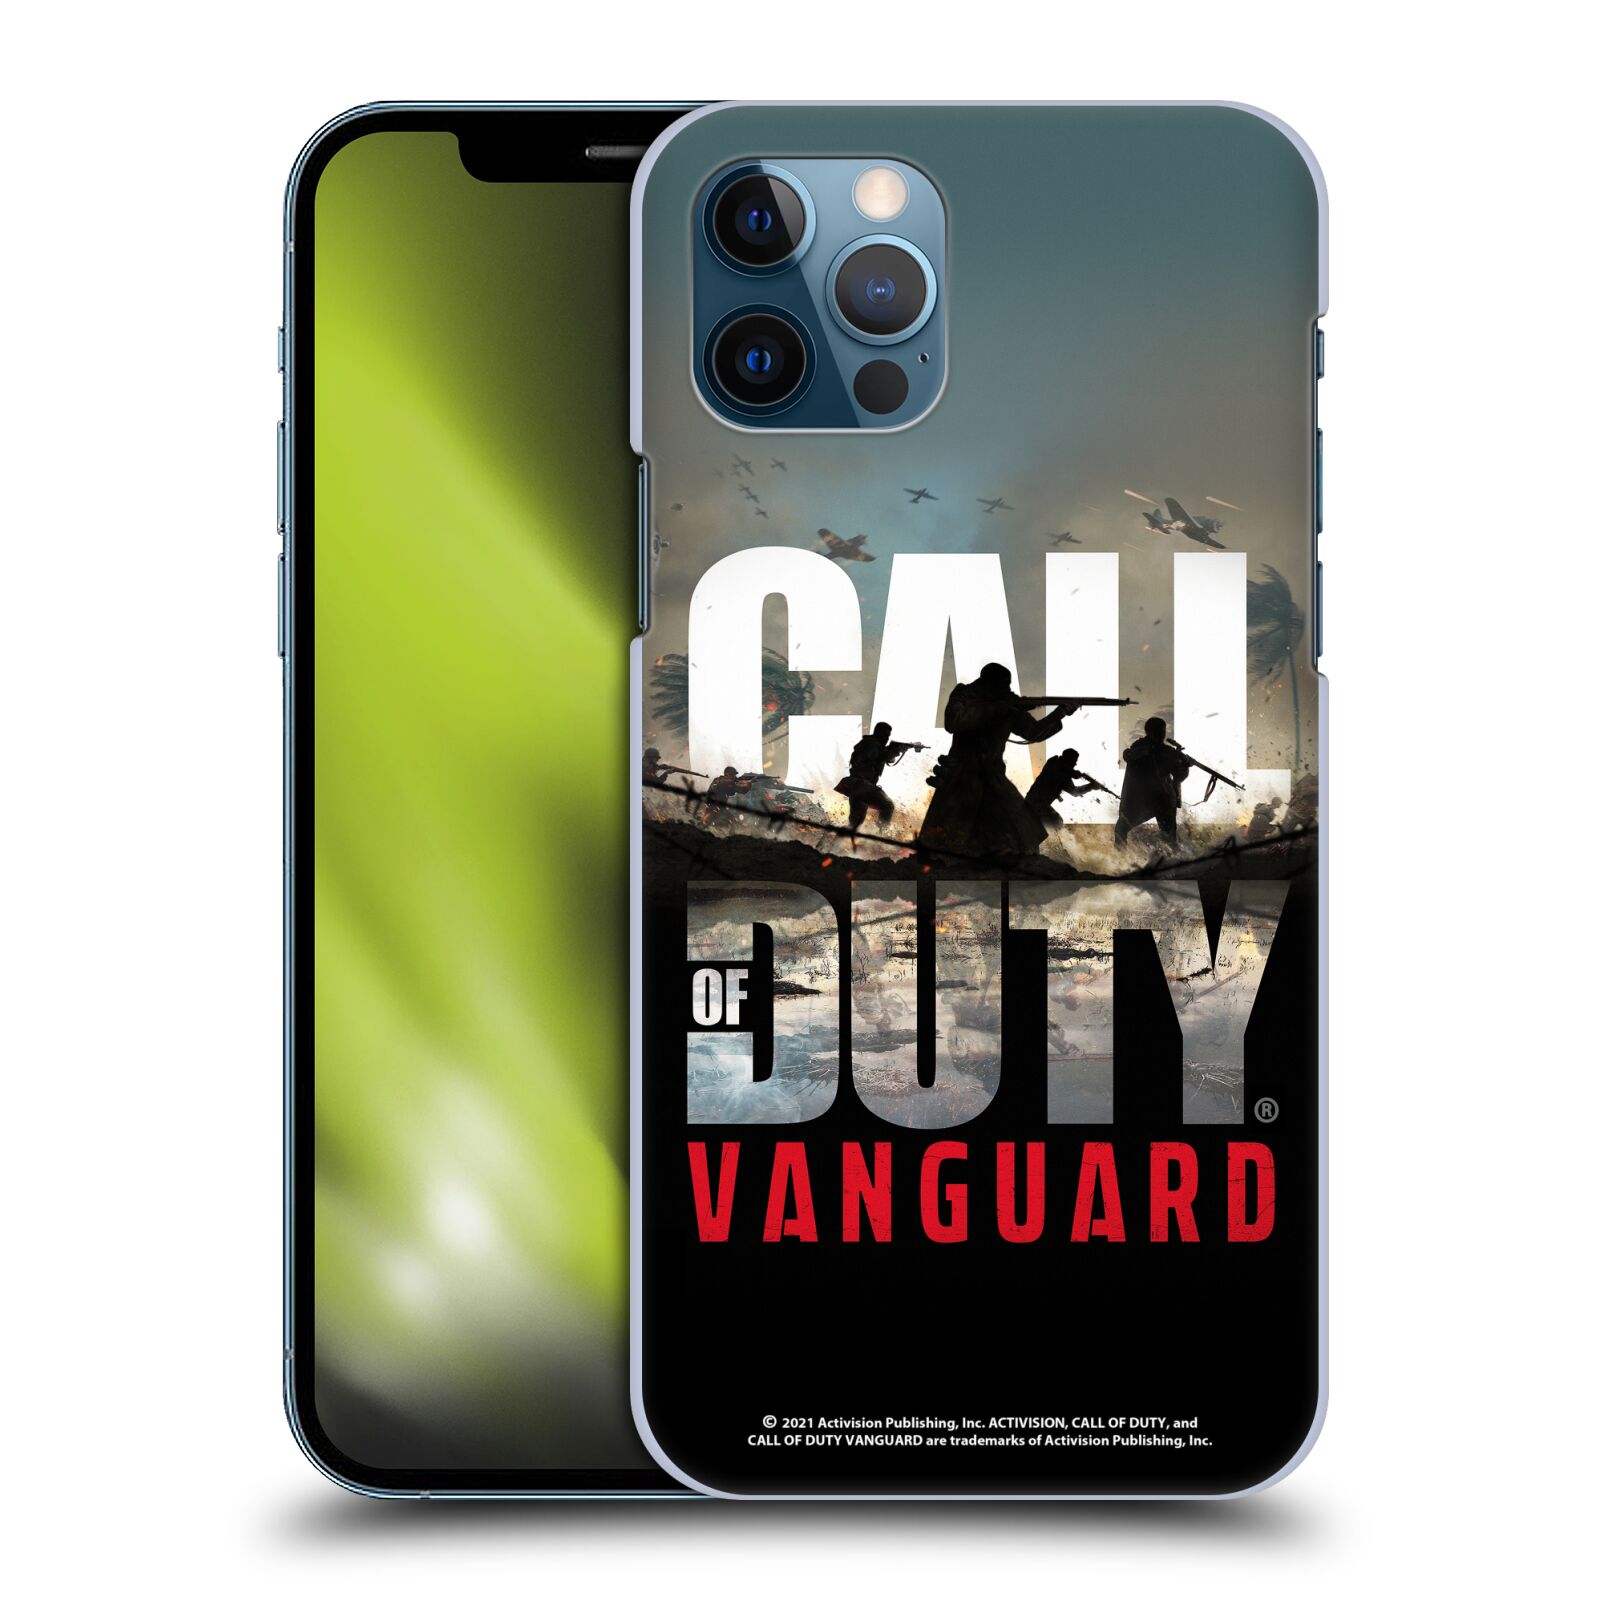 Zadní obal pro mobil Apple iPhone 12 / iPhone 12 Pro - HEAD CASE - Call of Duty - Vanguard